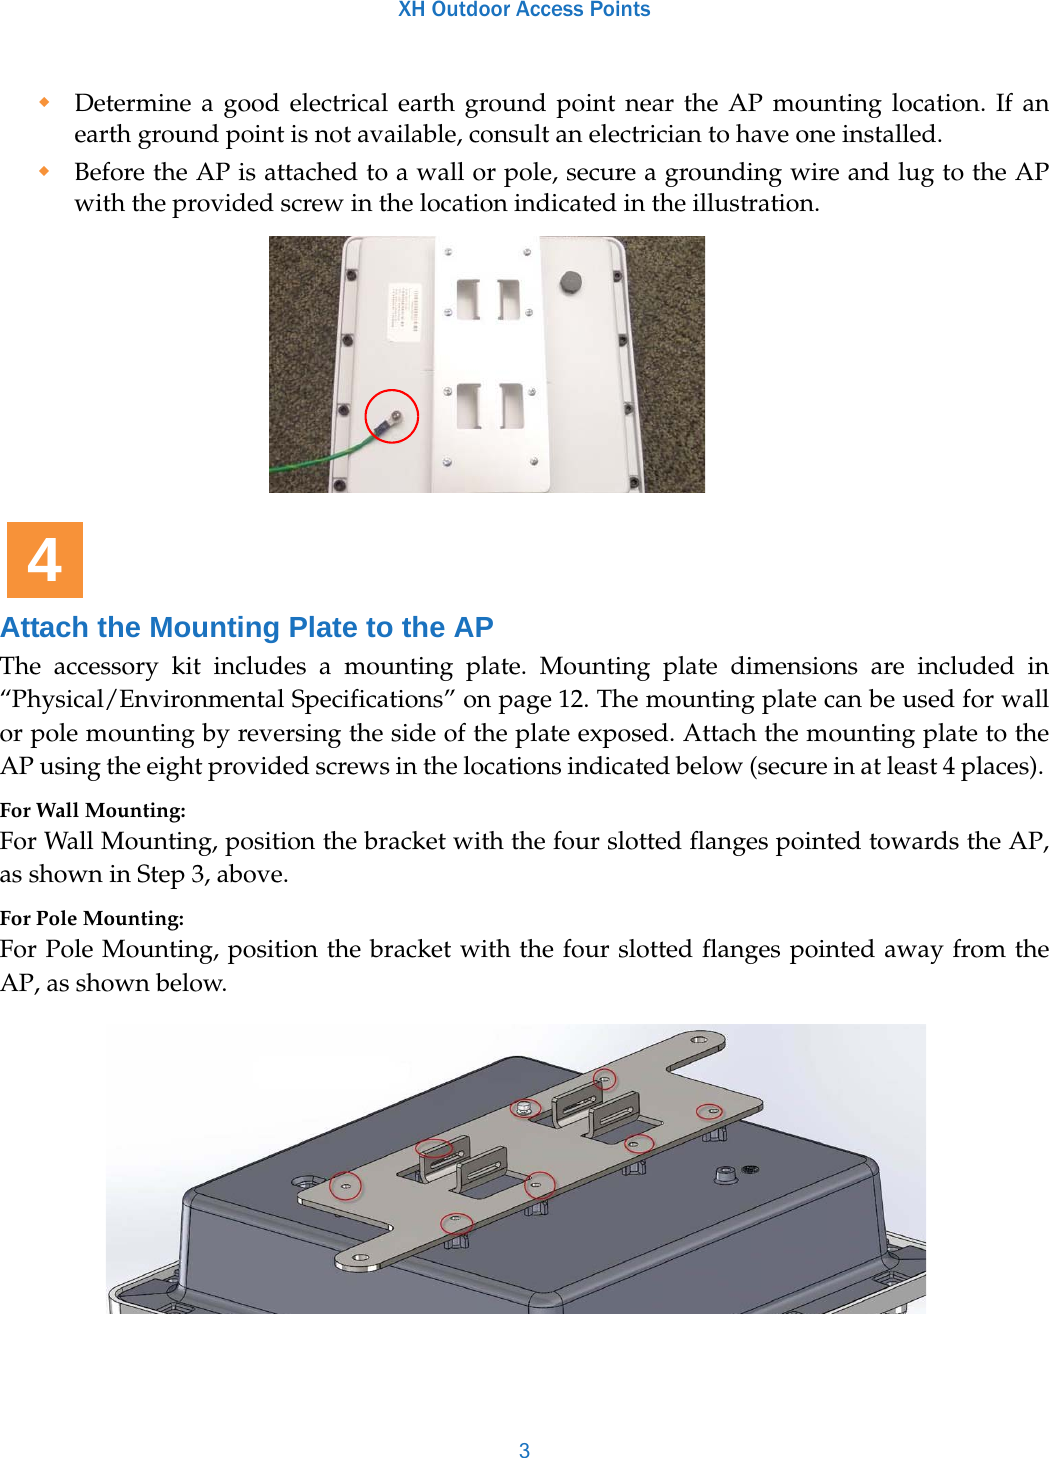 XH Outdoor Access Points3Determine a good electrical earth ground point near the AP mounting location. If an earth ground point is not available, consult an electrician to have one installed. Before the AP is attached to a wall or pole, secure a grounding wire and lug to the AP with the provided screw in the location indicated in the illustration.Attach the Mounting Plate to the APThe accessory kit includes a mounting plate. Mounting plate dimensions are included in “Physical/Environmental Specifications” on page 12. The mounting plate can be used for wall or pole mounting by reversing the side of the plate exposed. Attach the mounting plate to the AP using the eight provided screws in the locations indicated below (secure in at least 4 places). For Wall Mounting:For Wall Mounting, position the bracket with the four slotted flanges pointed towards the AP, as shown in Step 3, above. For Pole Mounting:For Pole Mounting, position the bracket with the four slotted flanges pointed away from the AP, as shown below.4